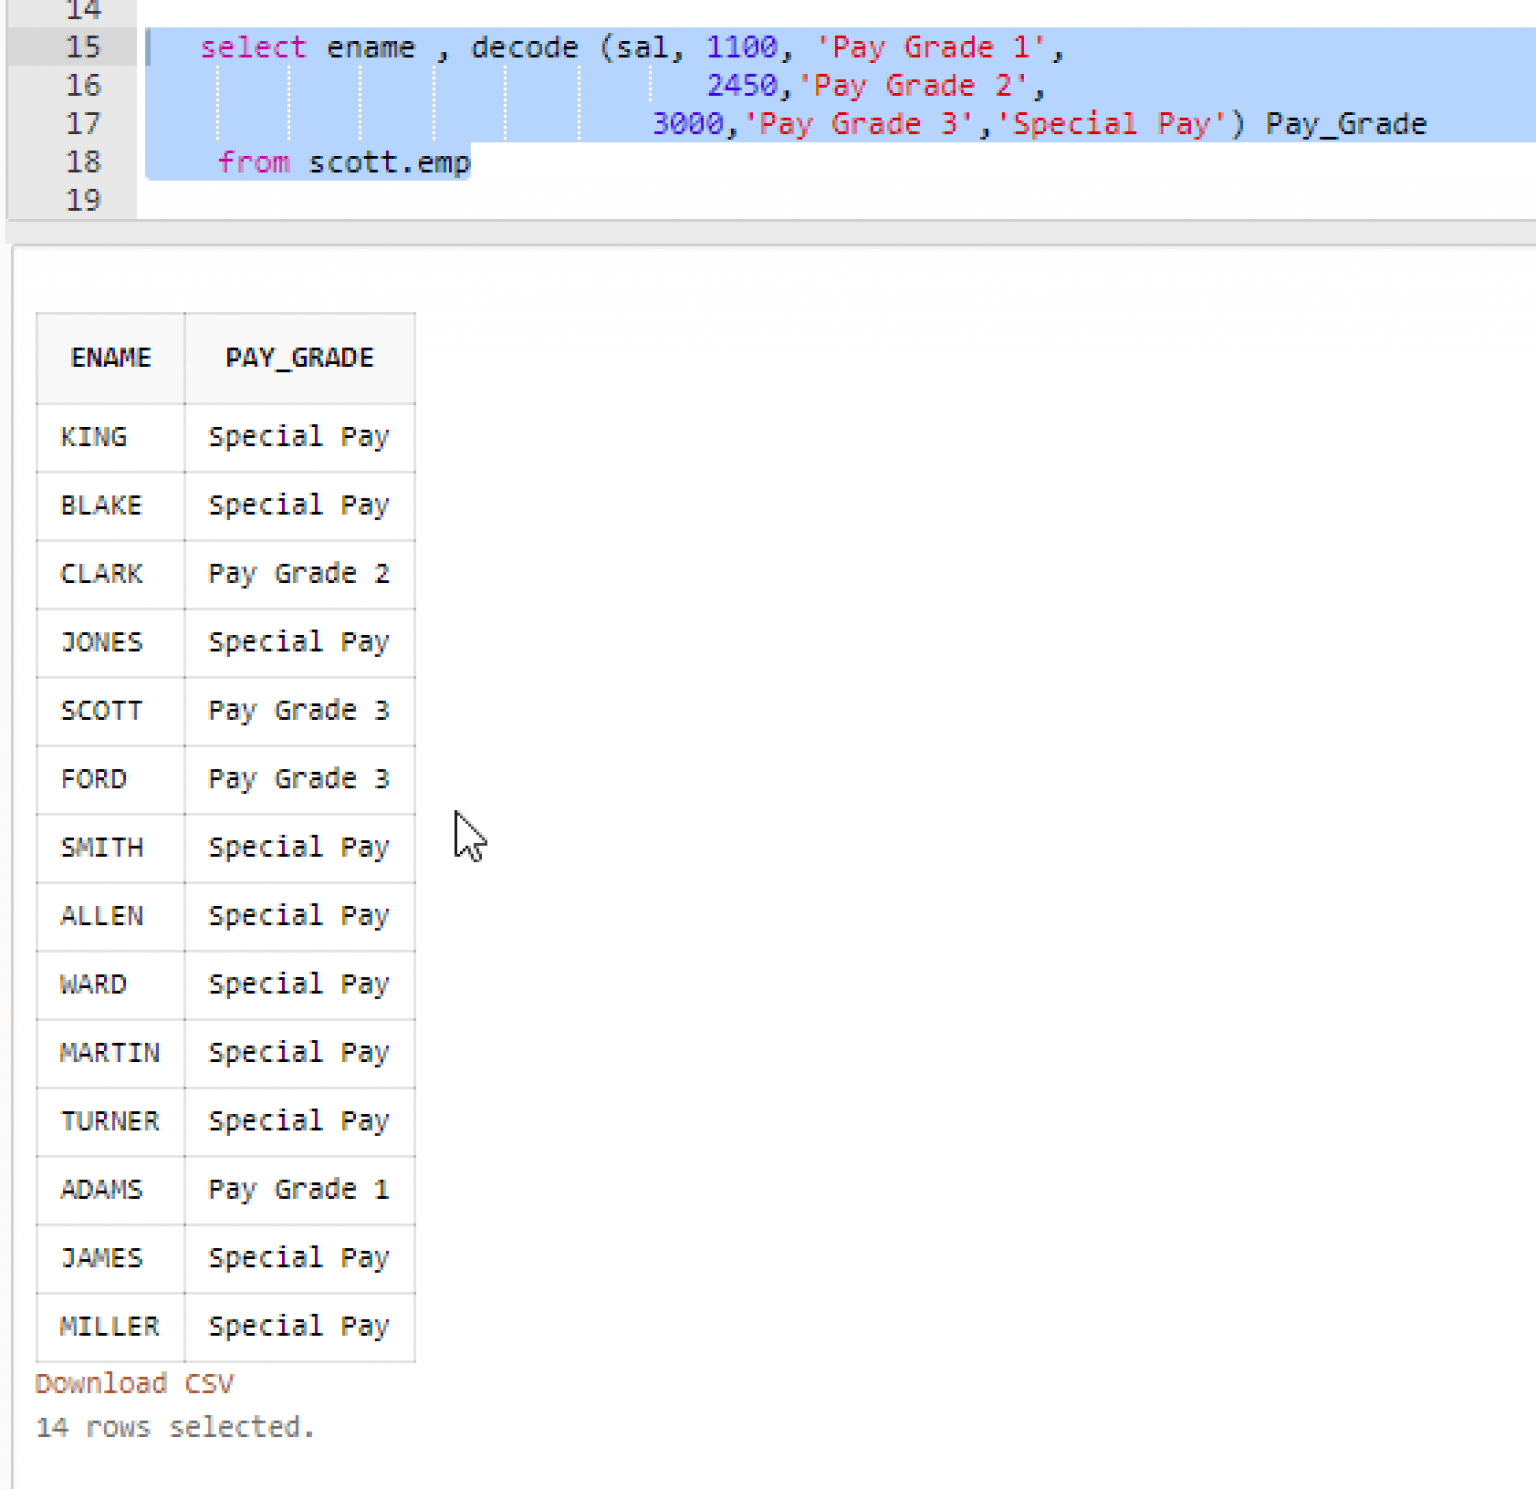 example decode oracle